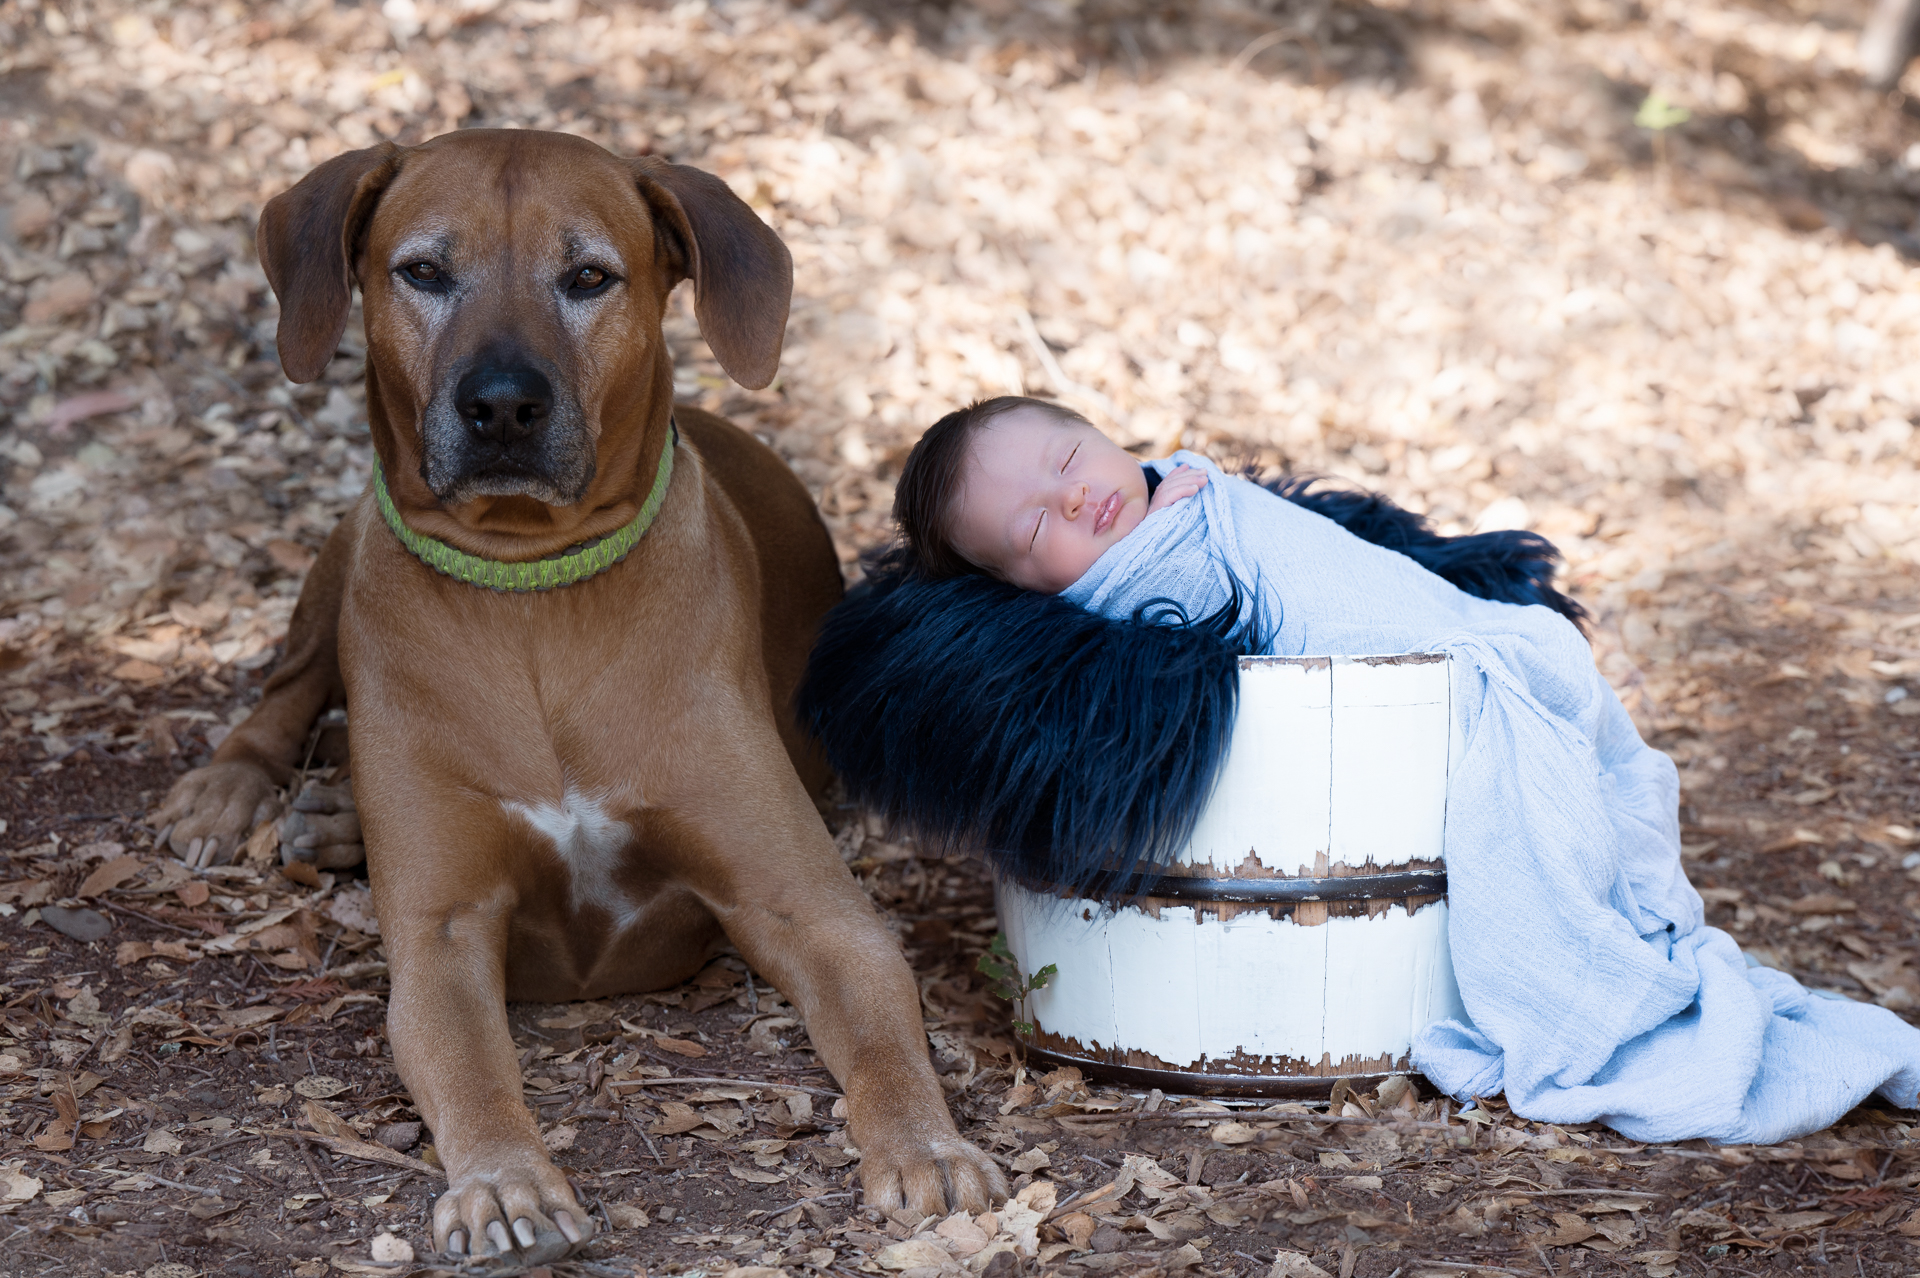 Newborn baby posing outdoors next to his family's dog.